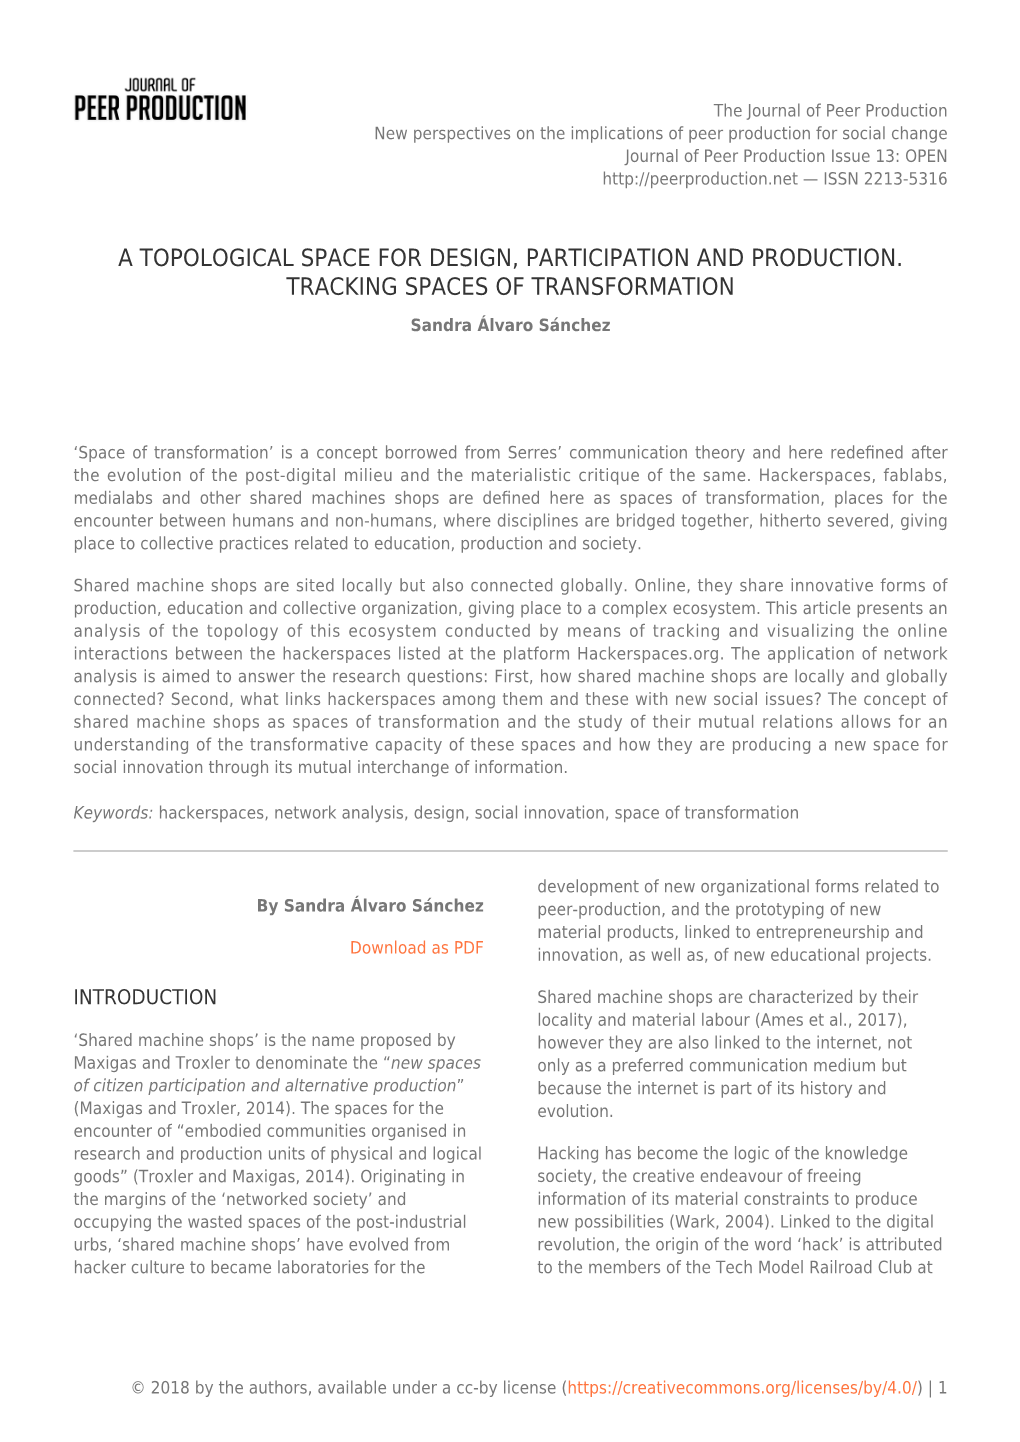 A Topological Space for Design, Participation and Production. Tracking Spaces of Transformation